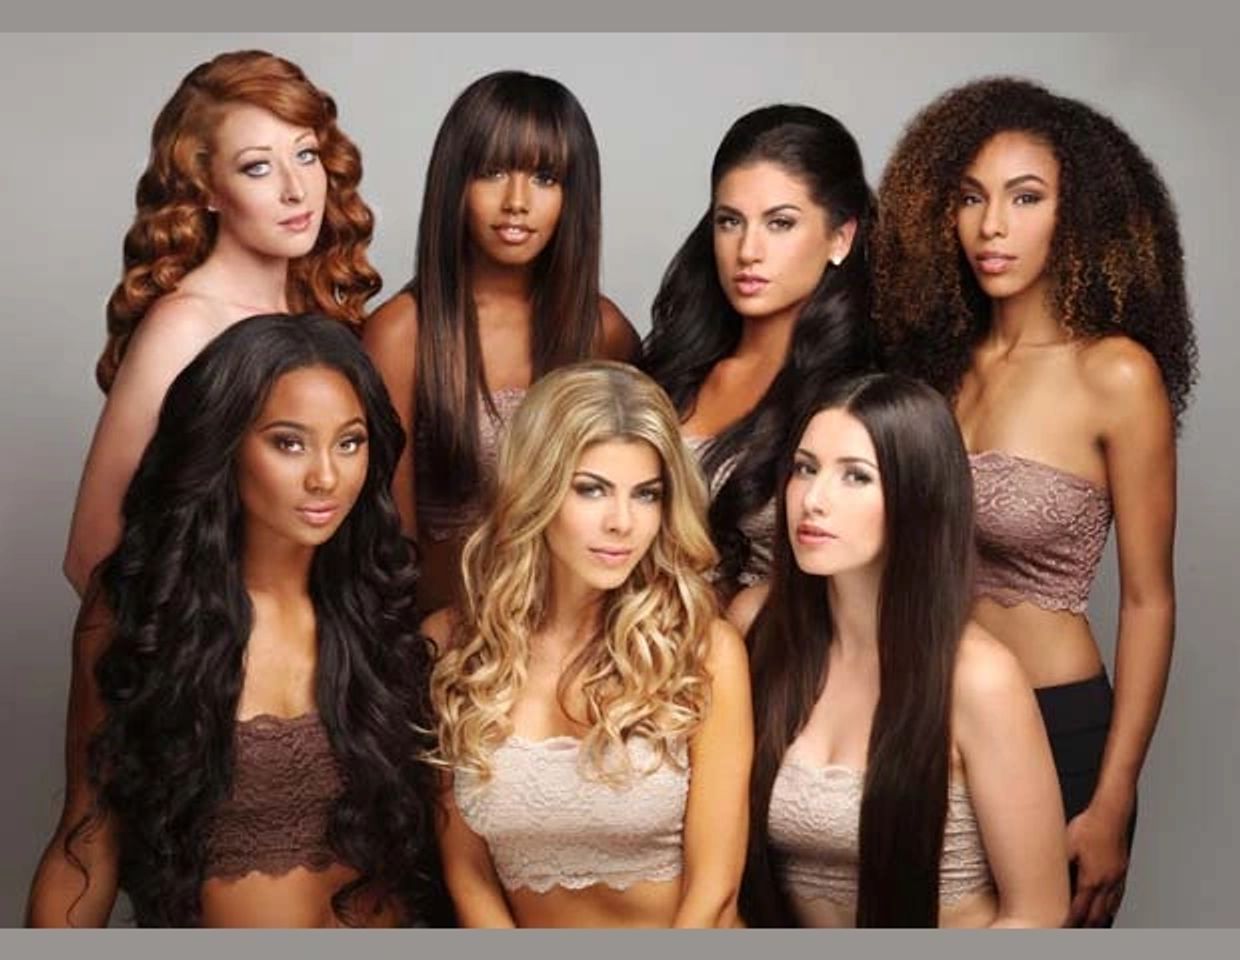 female models wearing different wig styles